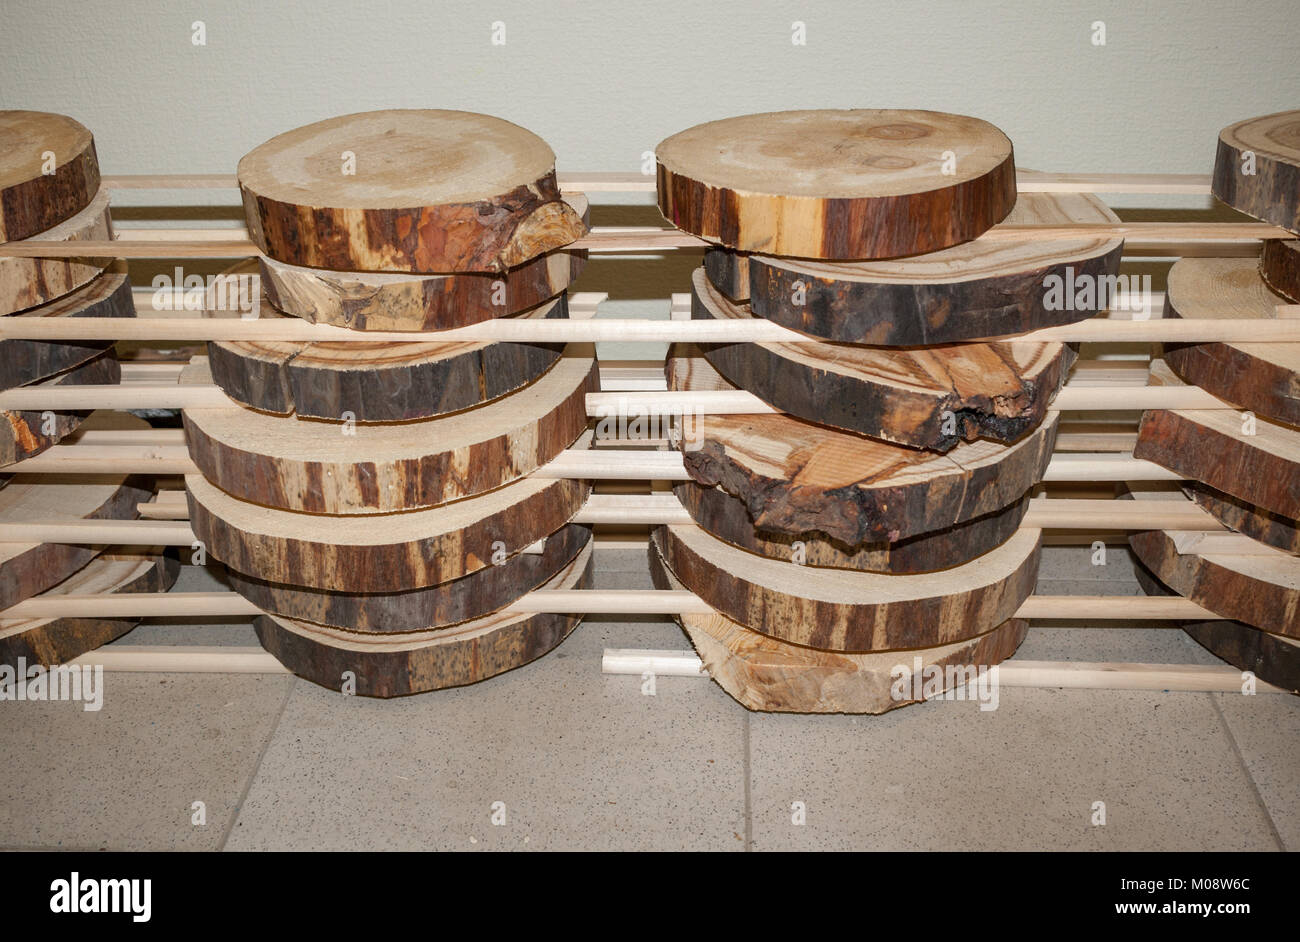 Folded stack of transverse wooden saw cuts stands vertically on floor. Stock Photo